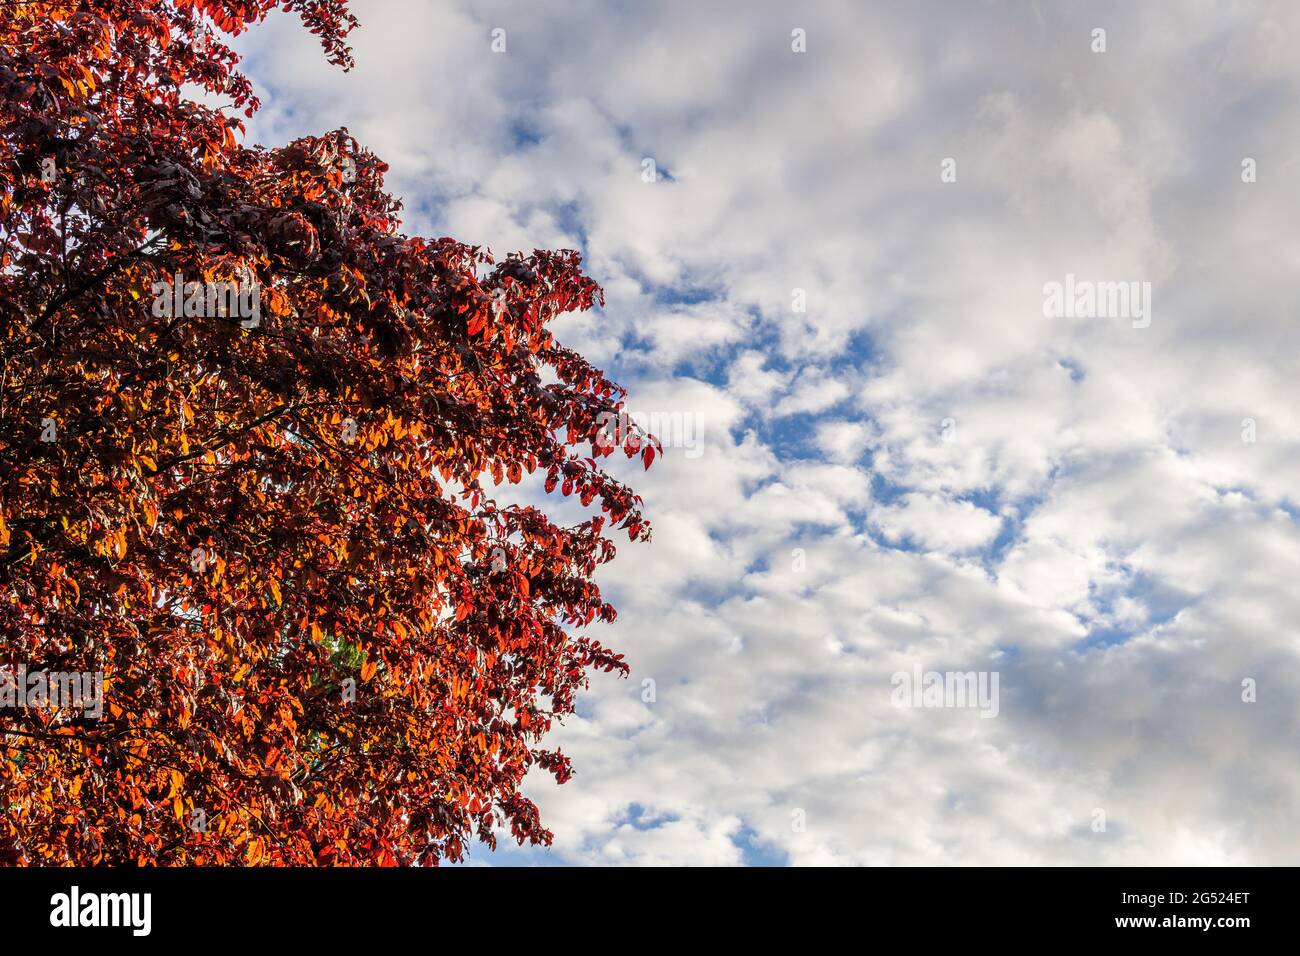 Autumn tree with red leaves against cloudy sky background Stock Photo